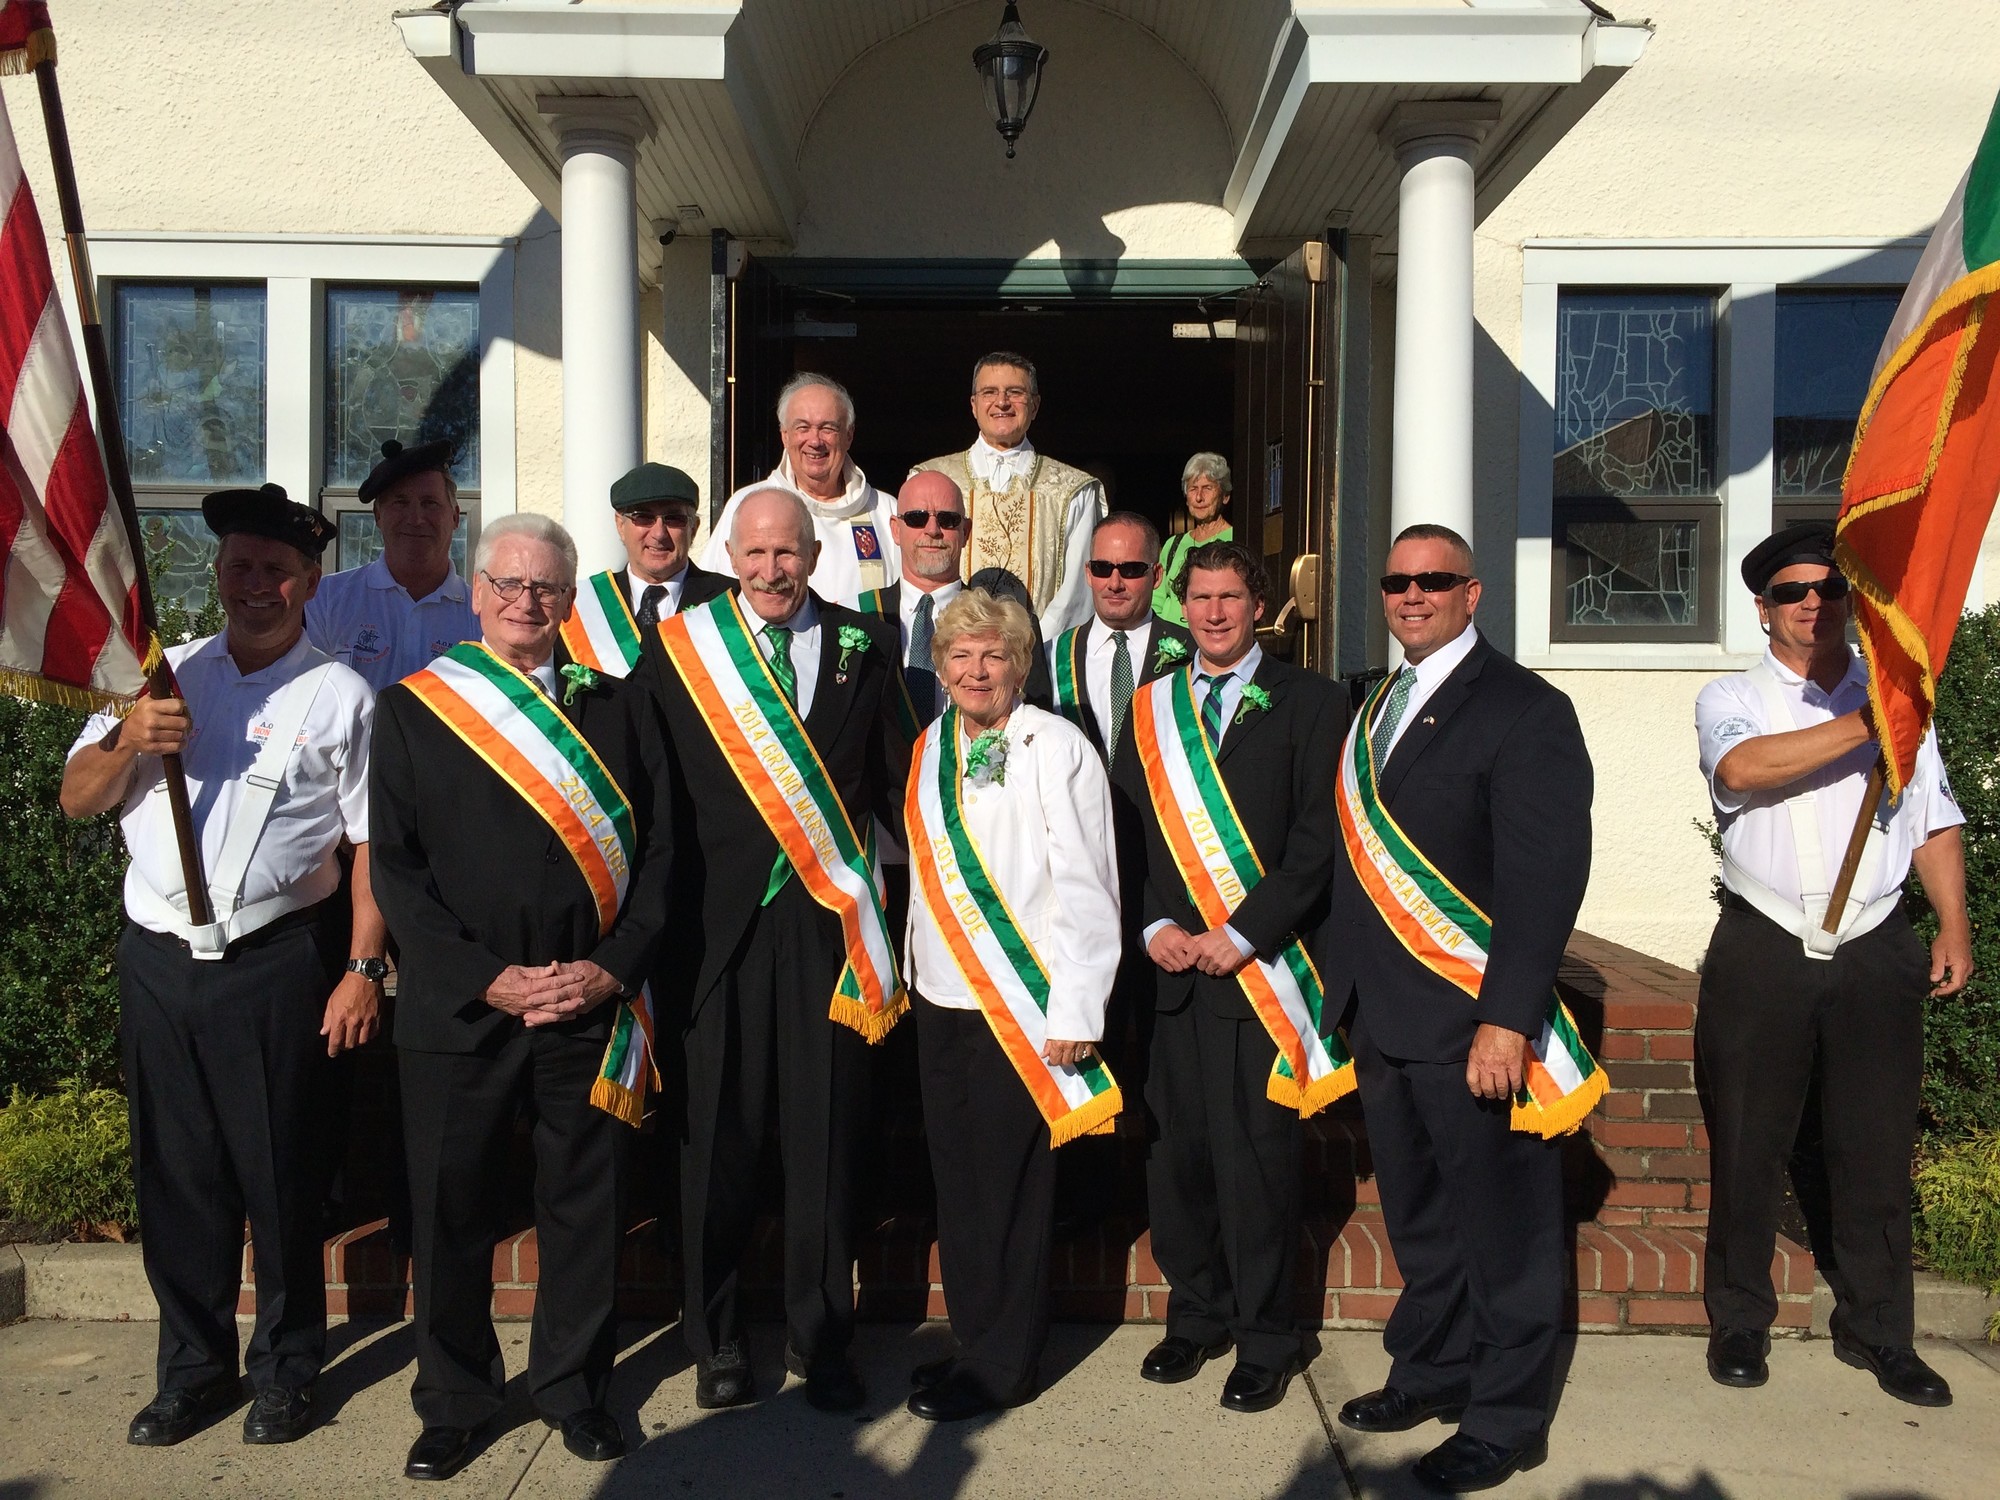 2014 AOH Irish Day parade honorees, Roy Doyle, third from left, Bill Treadway, Grand Marshal Randy Dodd, AOH Division 17 President Joseph Moran, Ladies’ AOH Diane Hagen, Danny Ryan, Darren Siff, and AOH Division 17 Parade Chairman Bernie Petty. Top row: Msgr. Donald Beckman and Father John Tutone.